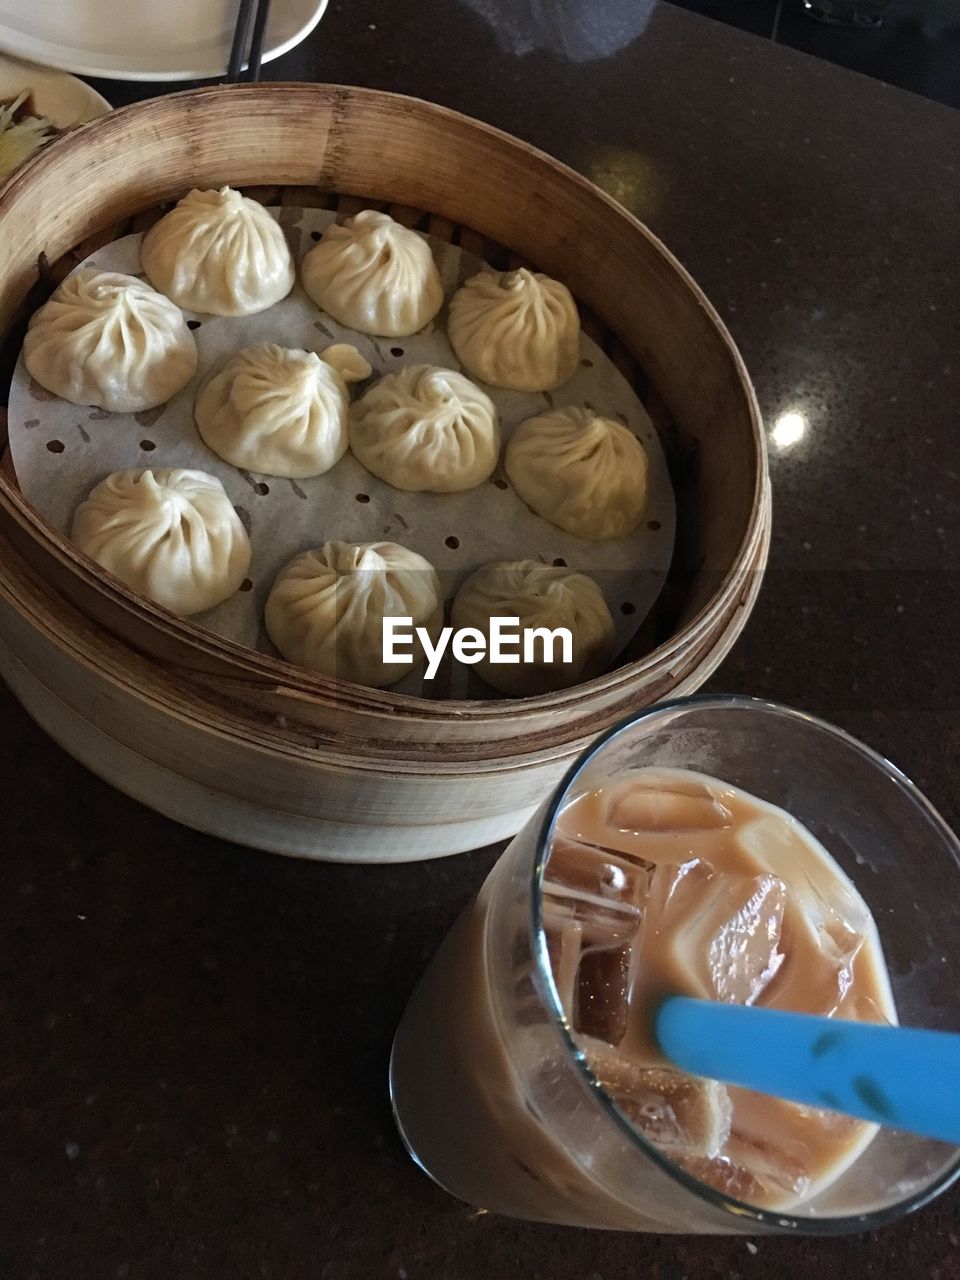 High angle view of dumplings and cold coffee on table